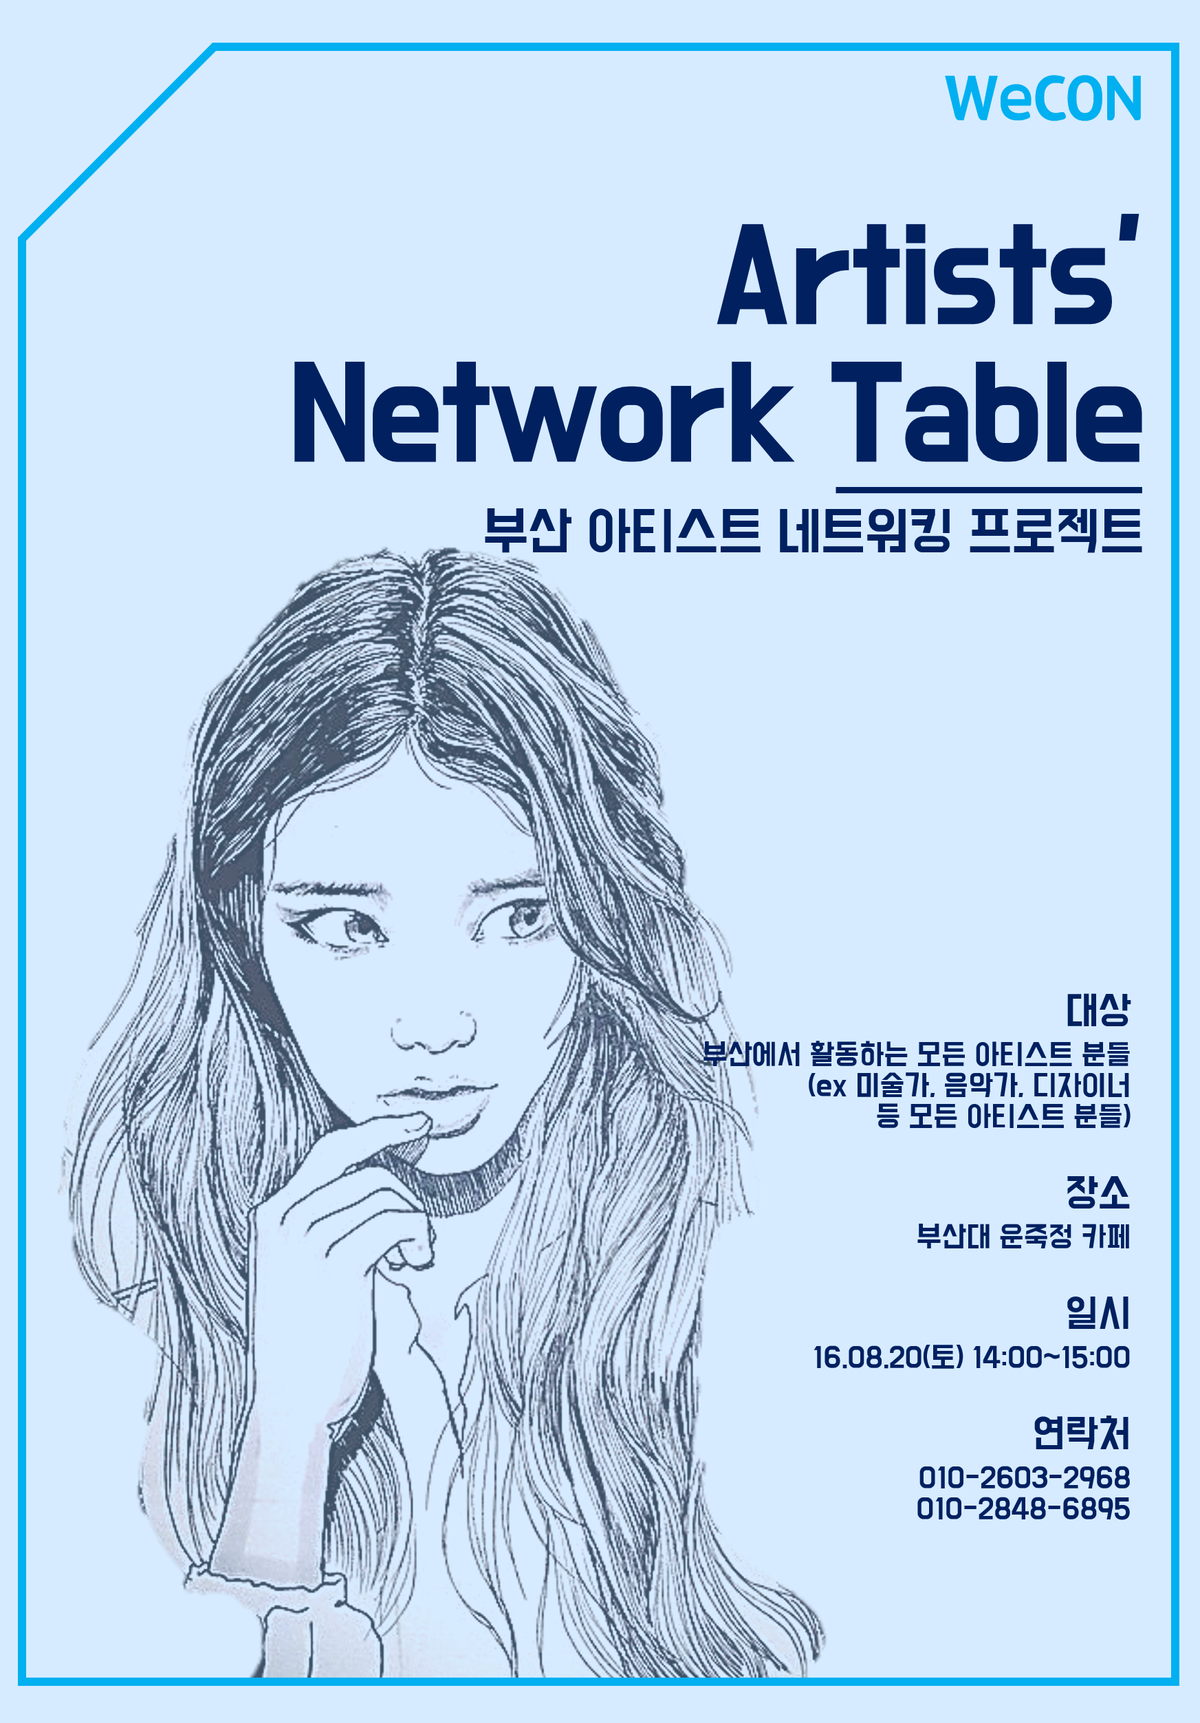 networking poster edited.PNG